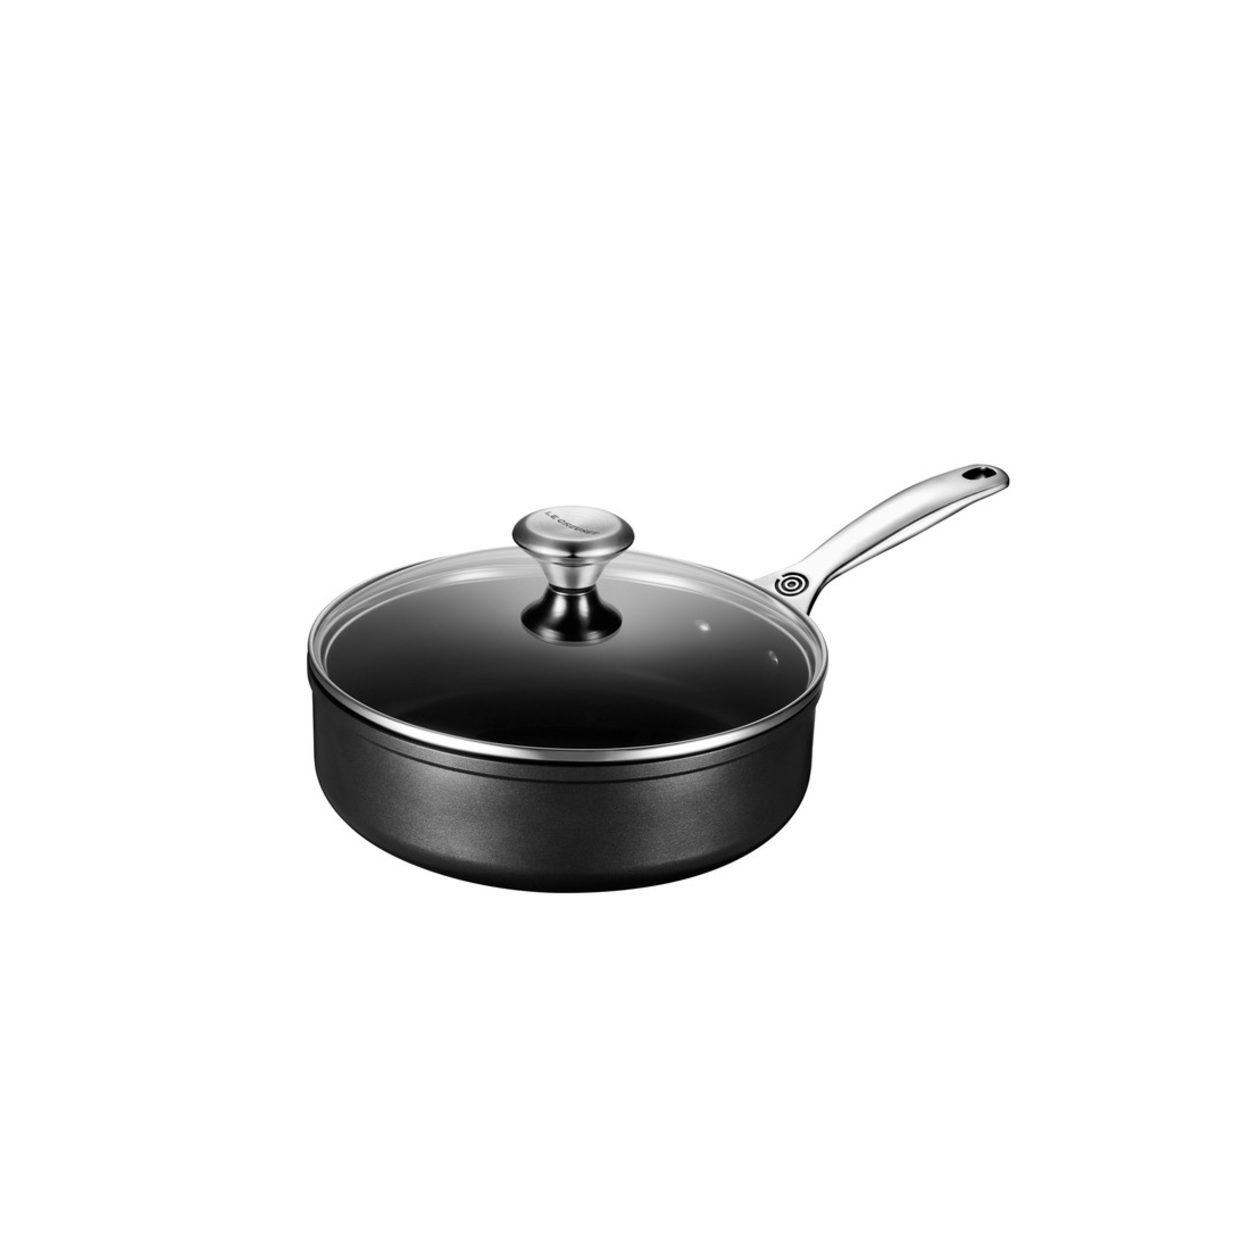  Le Creuset Tri-Ply Stainless Steel 2 pc. Nonstick Fry